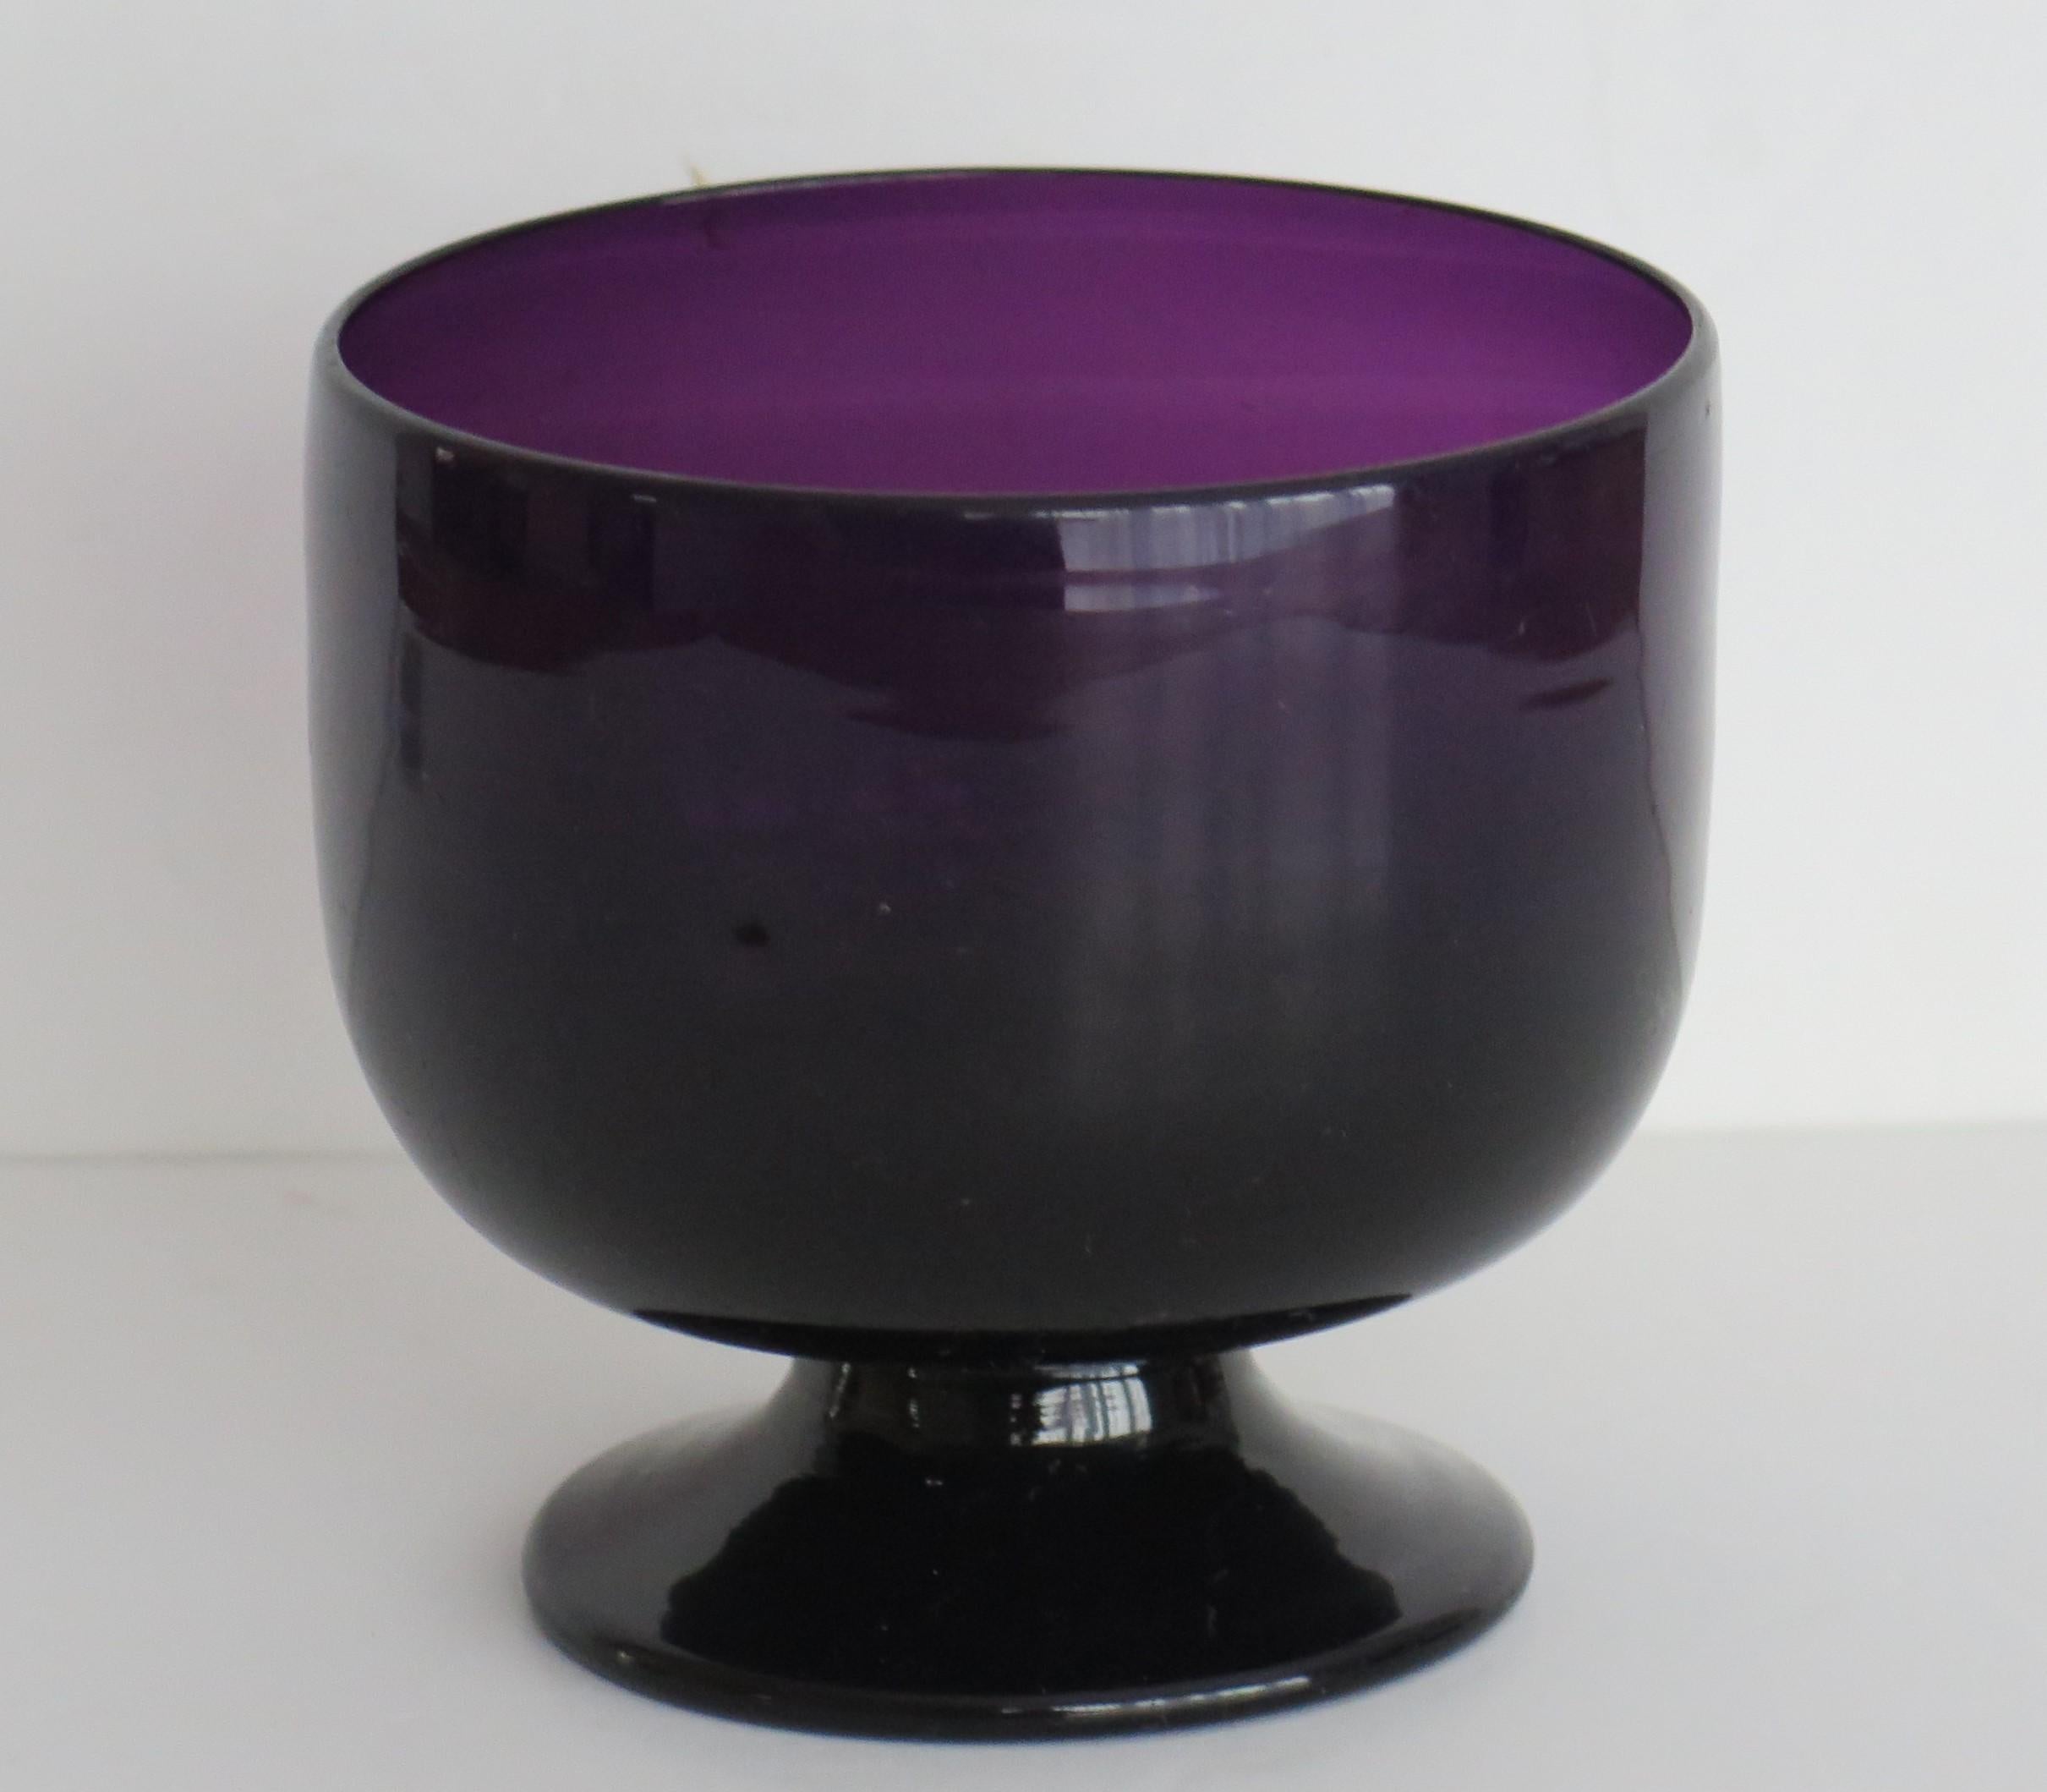 This is a rare hand blown lead glass sugar bowl in a beautiful amethyst colour, dating to the late 18th century, George 111rd period, circa 1800. 

The hand blown glass has a lovely amethyst colour which alters with the amount of light on